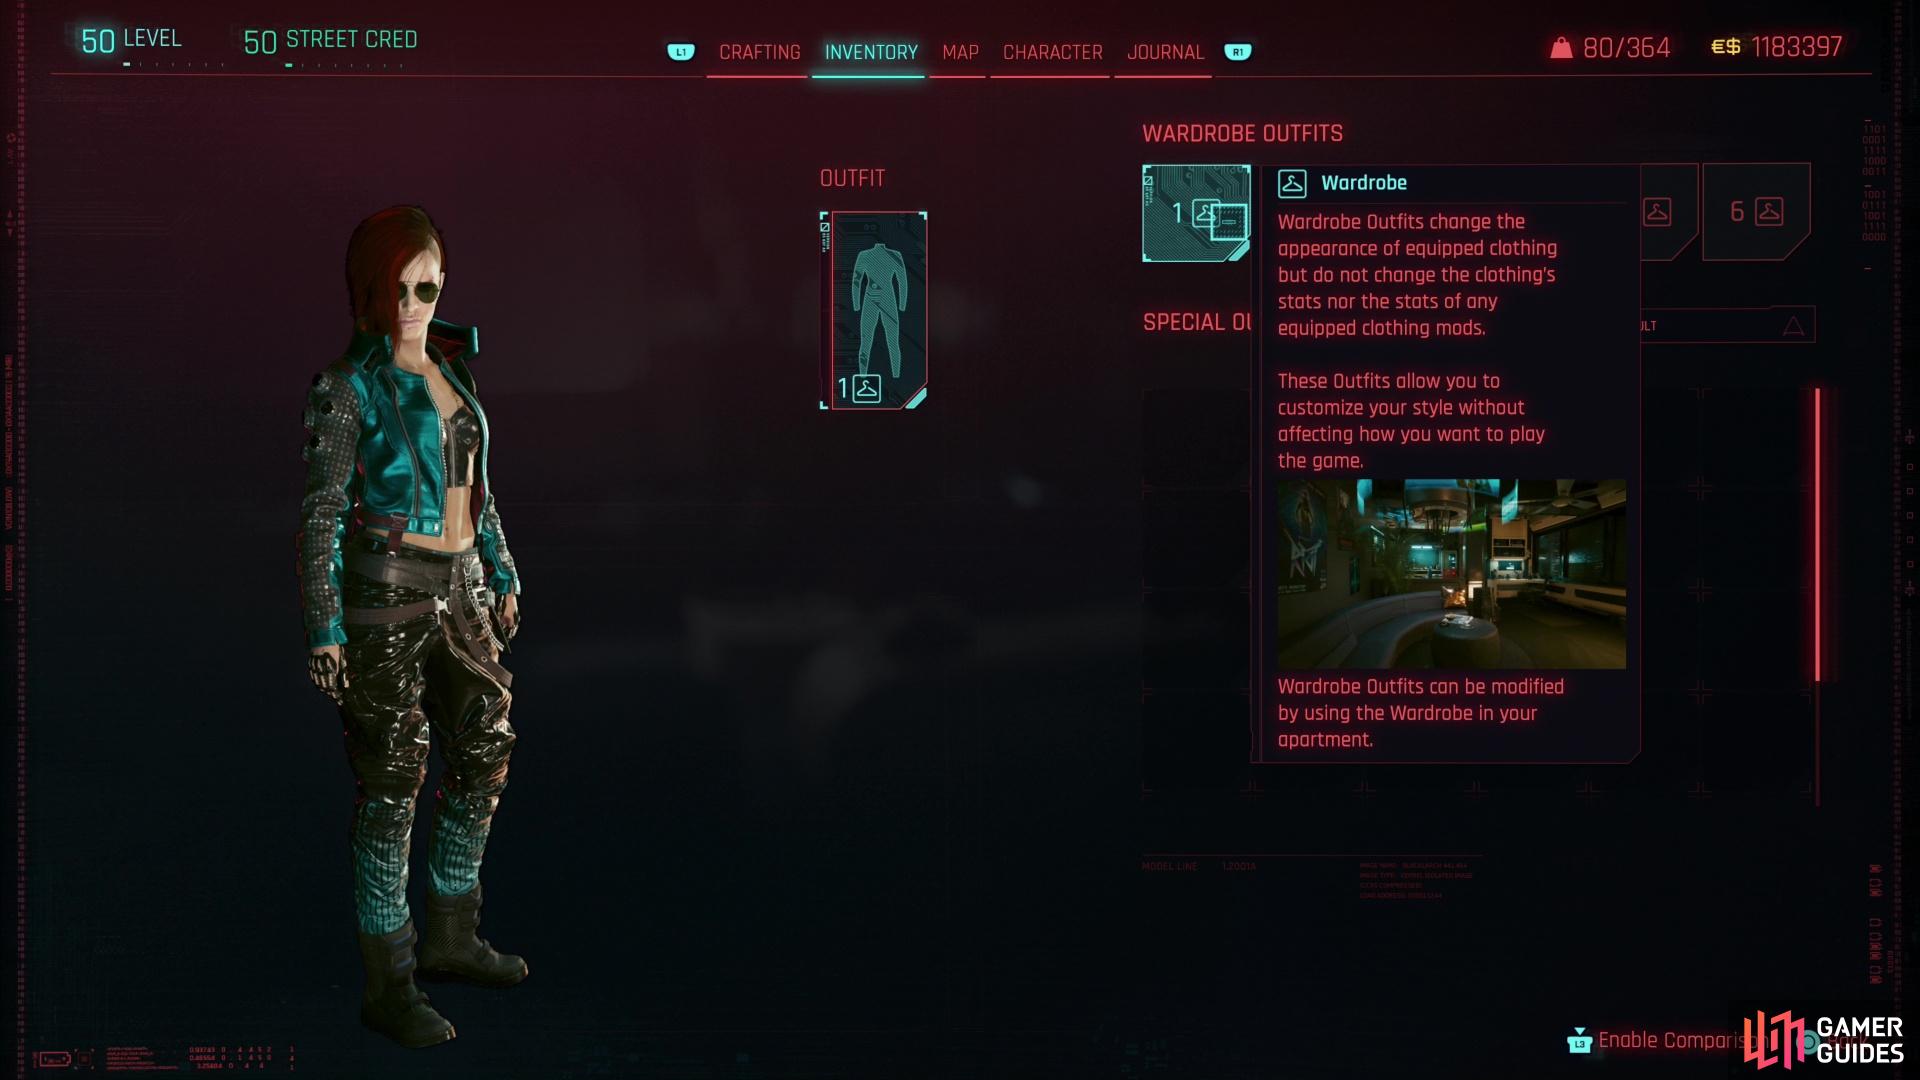 You can switch between any assembled outfits at any time - these will replace the likeness, but not the stats, of your currently equipped clothing.